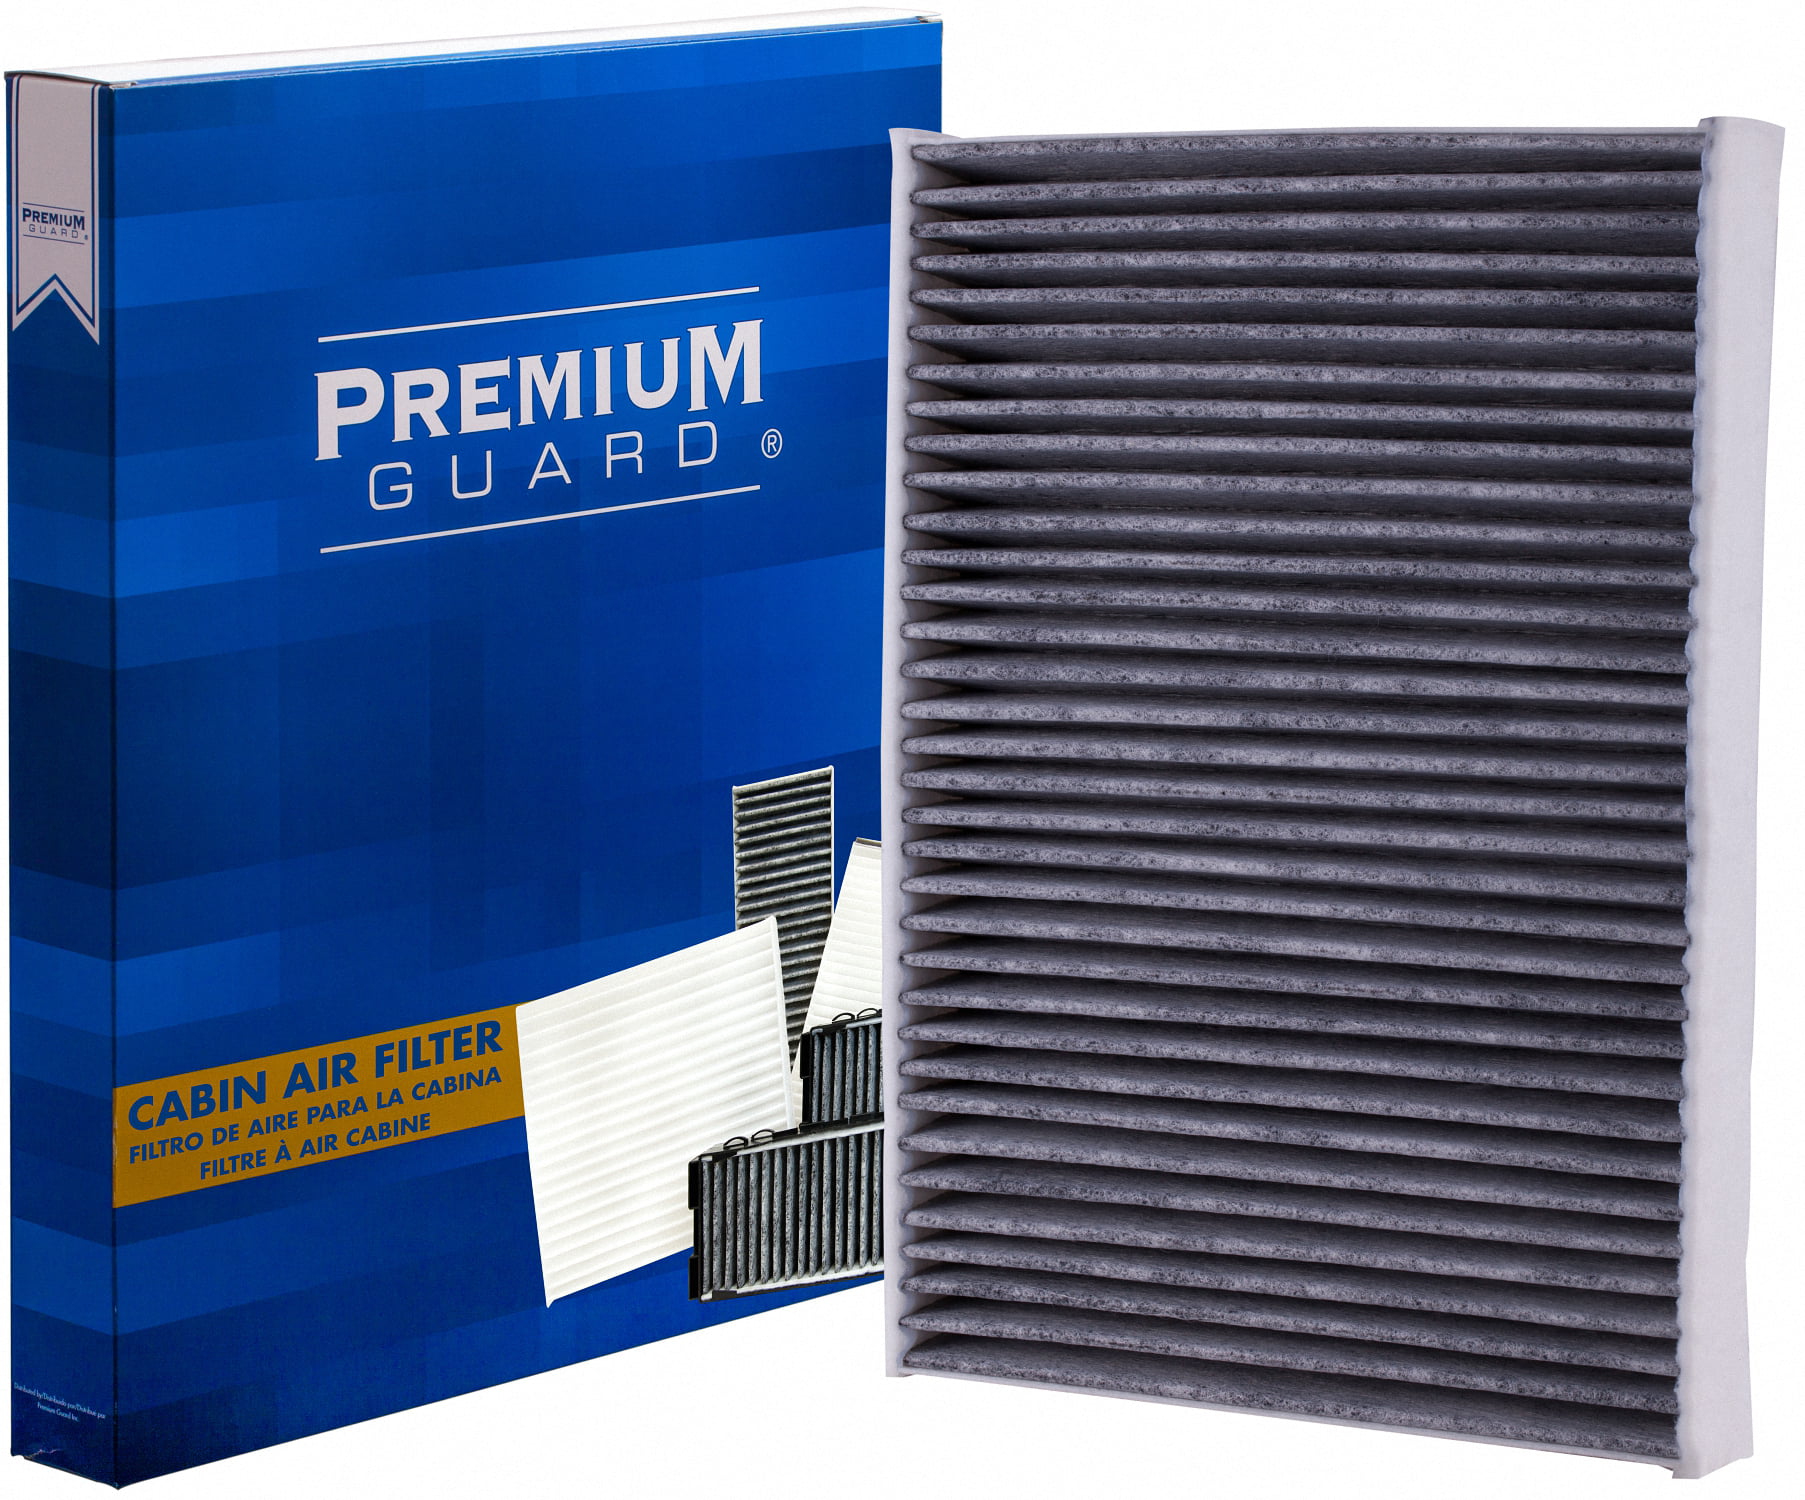 PG Cabin Air Filter PC99334C | Fits 2017-18 Audi A4 allroad, 2017-18 A4 Quattro, 2018 A5 Quattro 2017 Audi Q7 Engine Air Filter Replacement